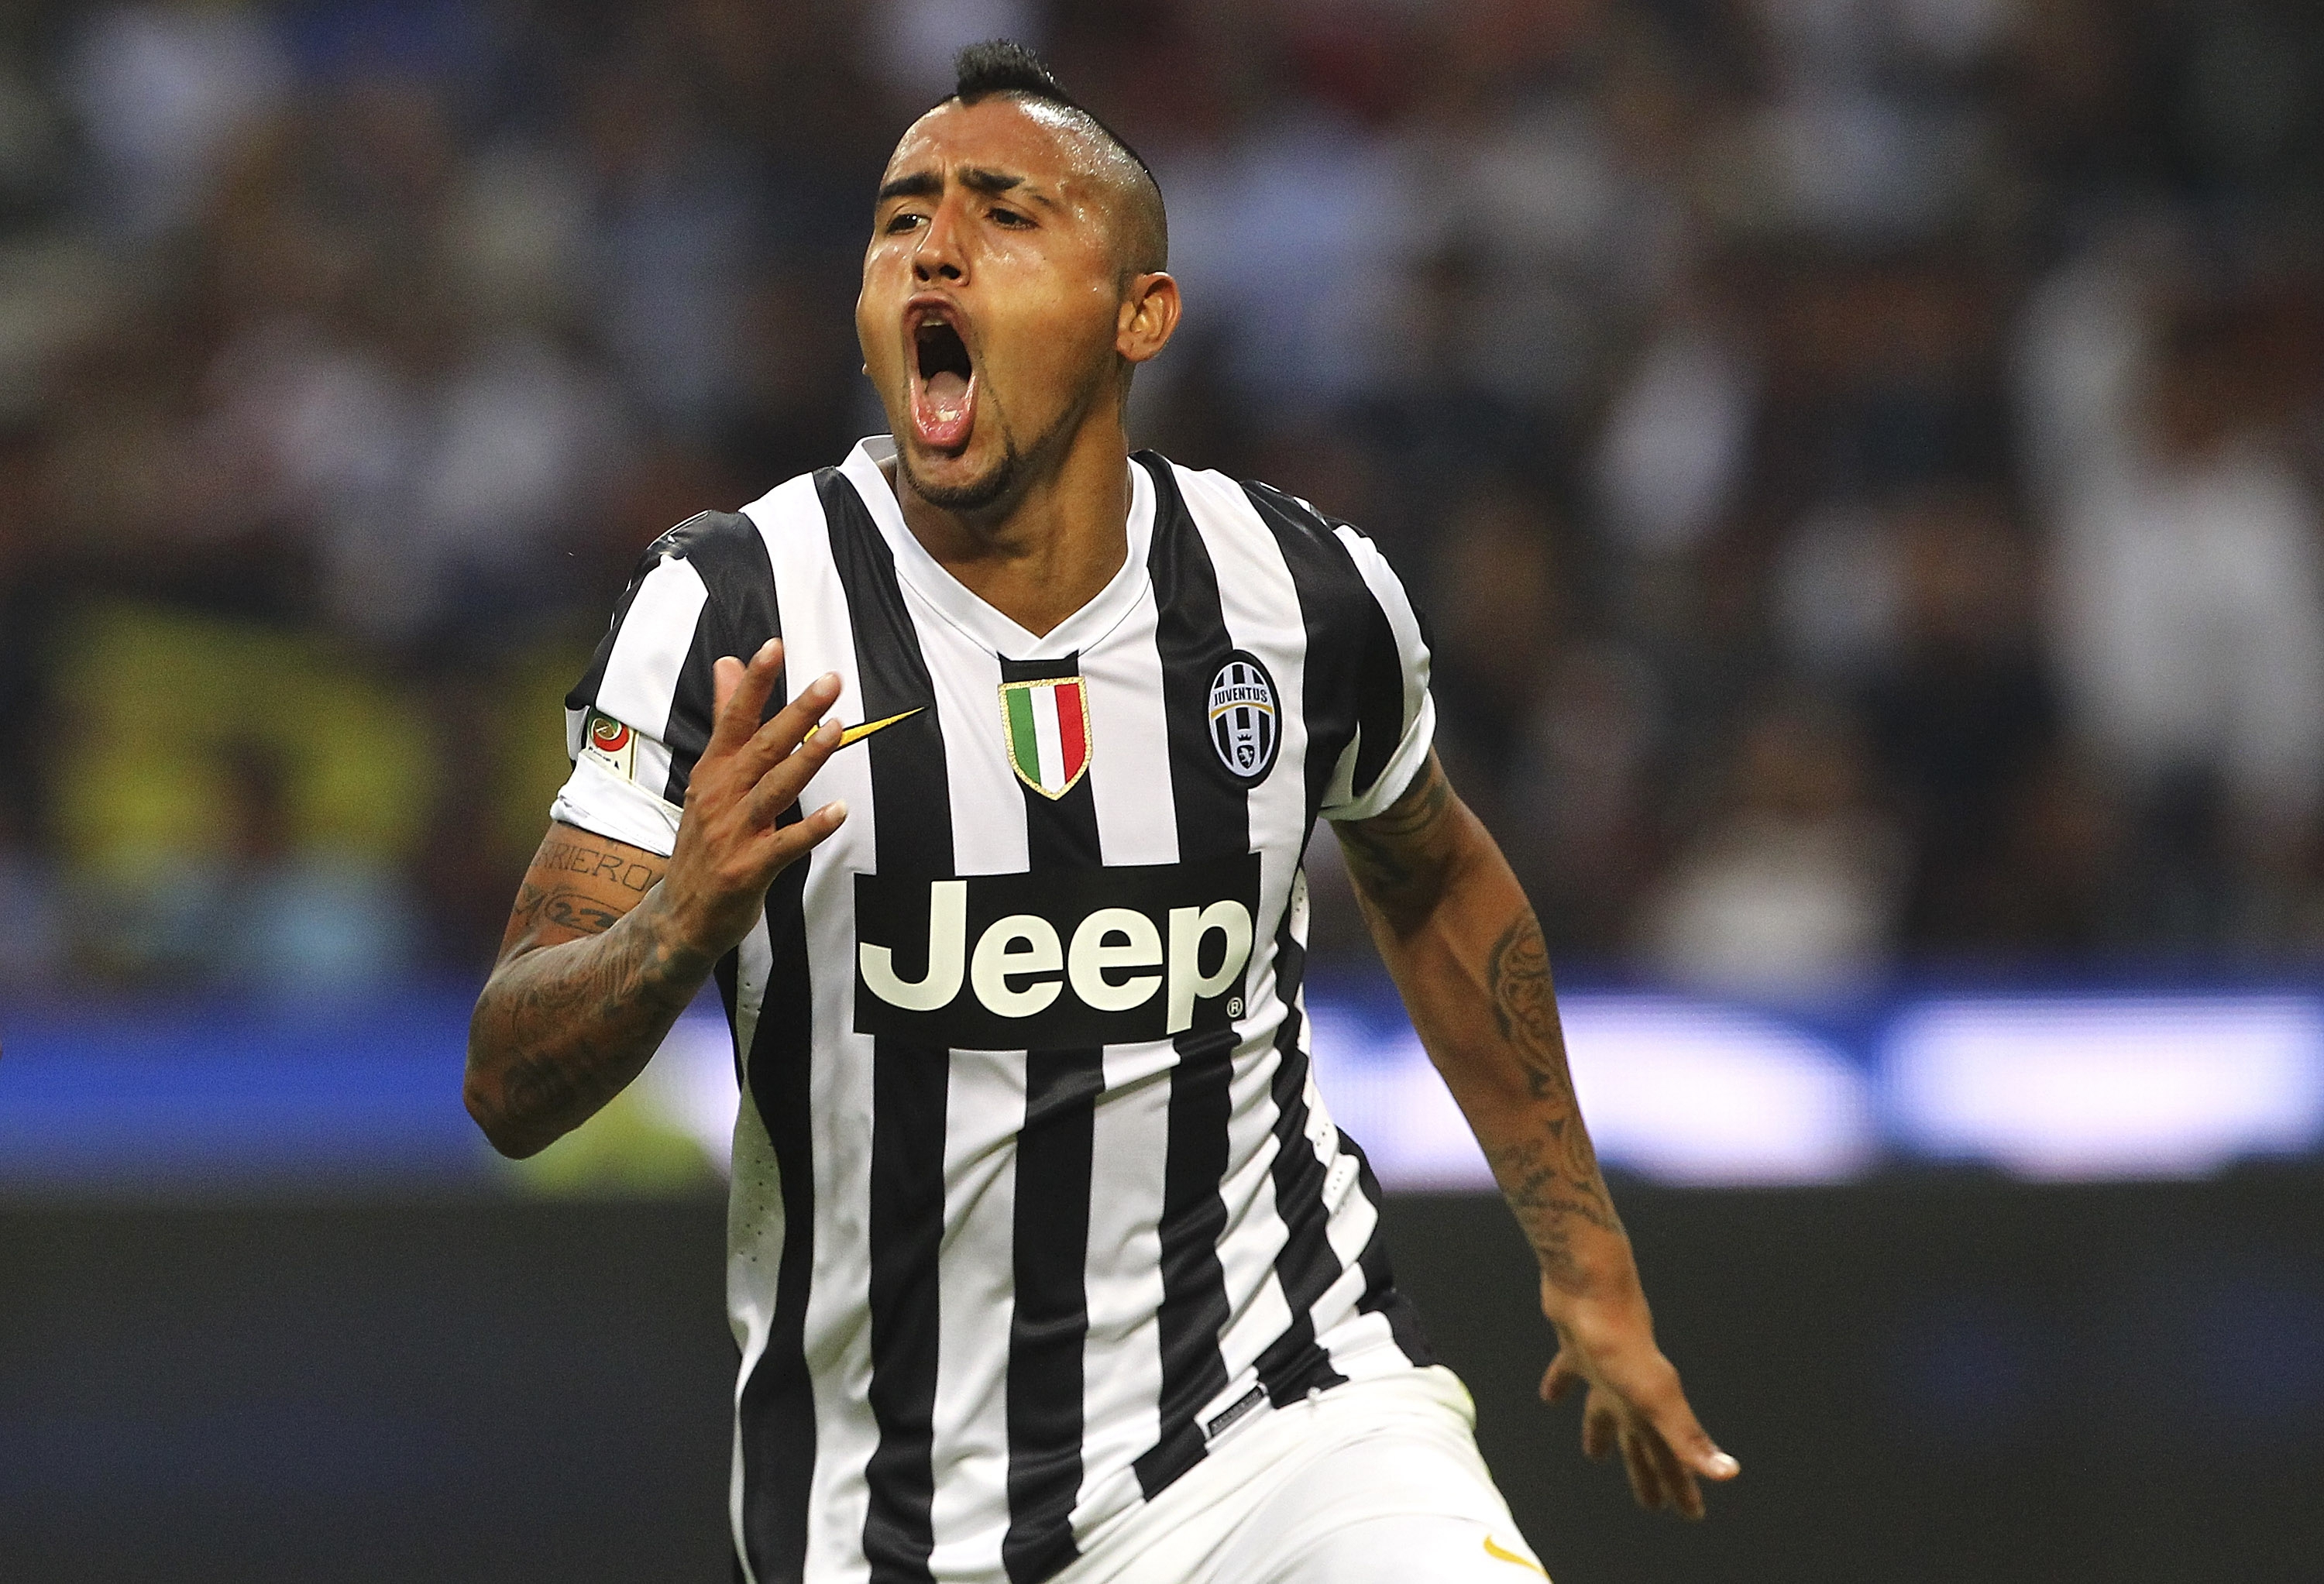 Arturo Vidal Wallpapers Images Photos Pictures Backgrounds